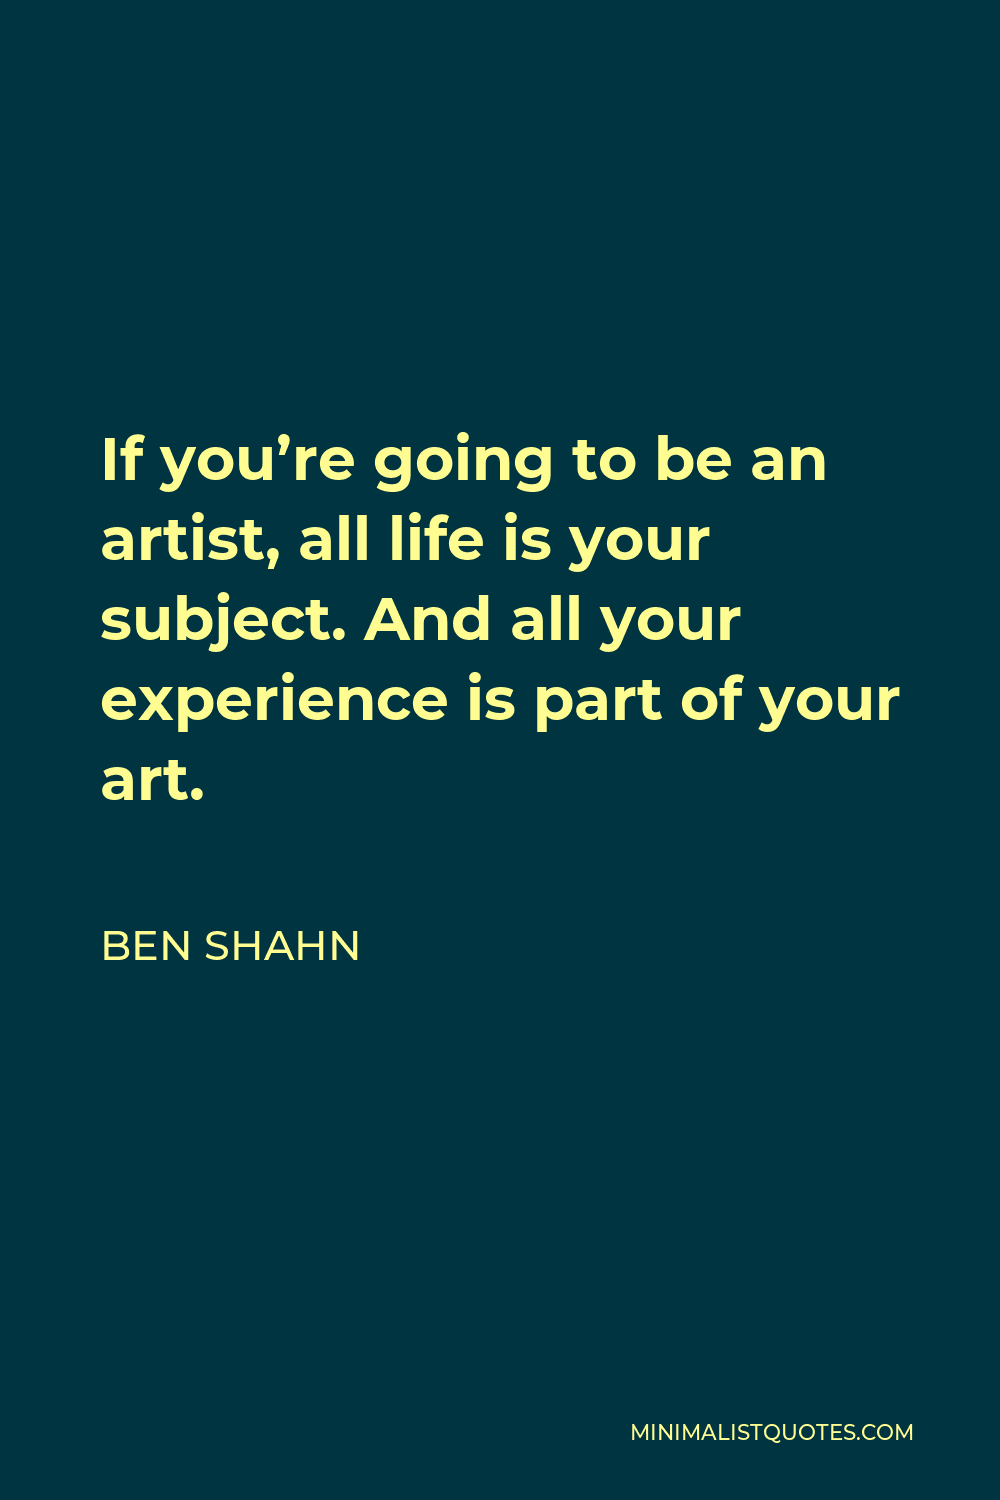 Ben Shahn Quote - If you’re going to be an artist, all life is your subject. And all your experience is part of your art.